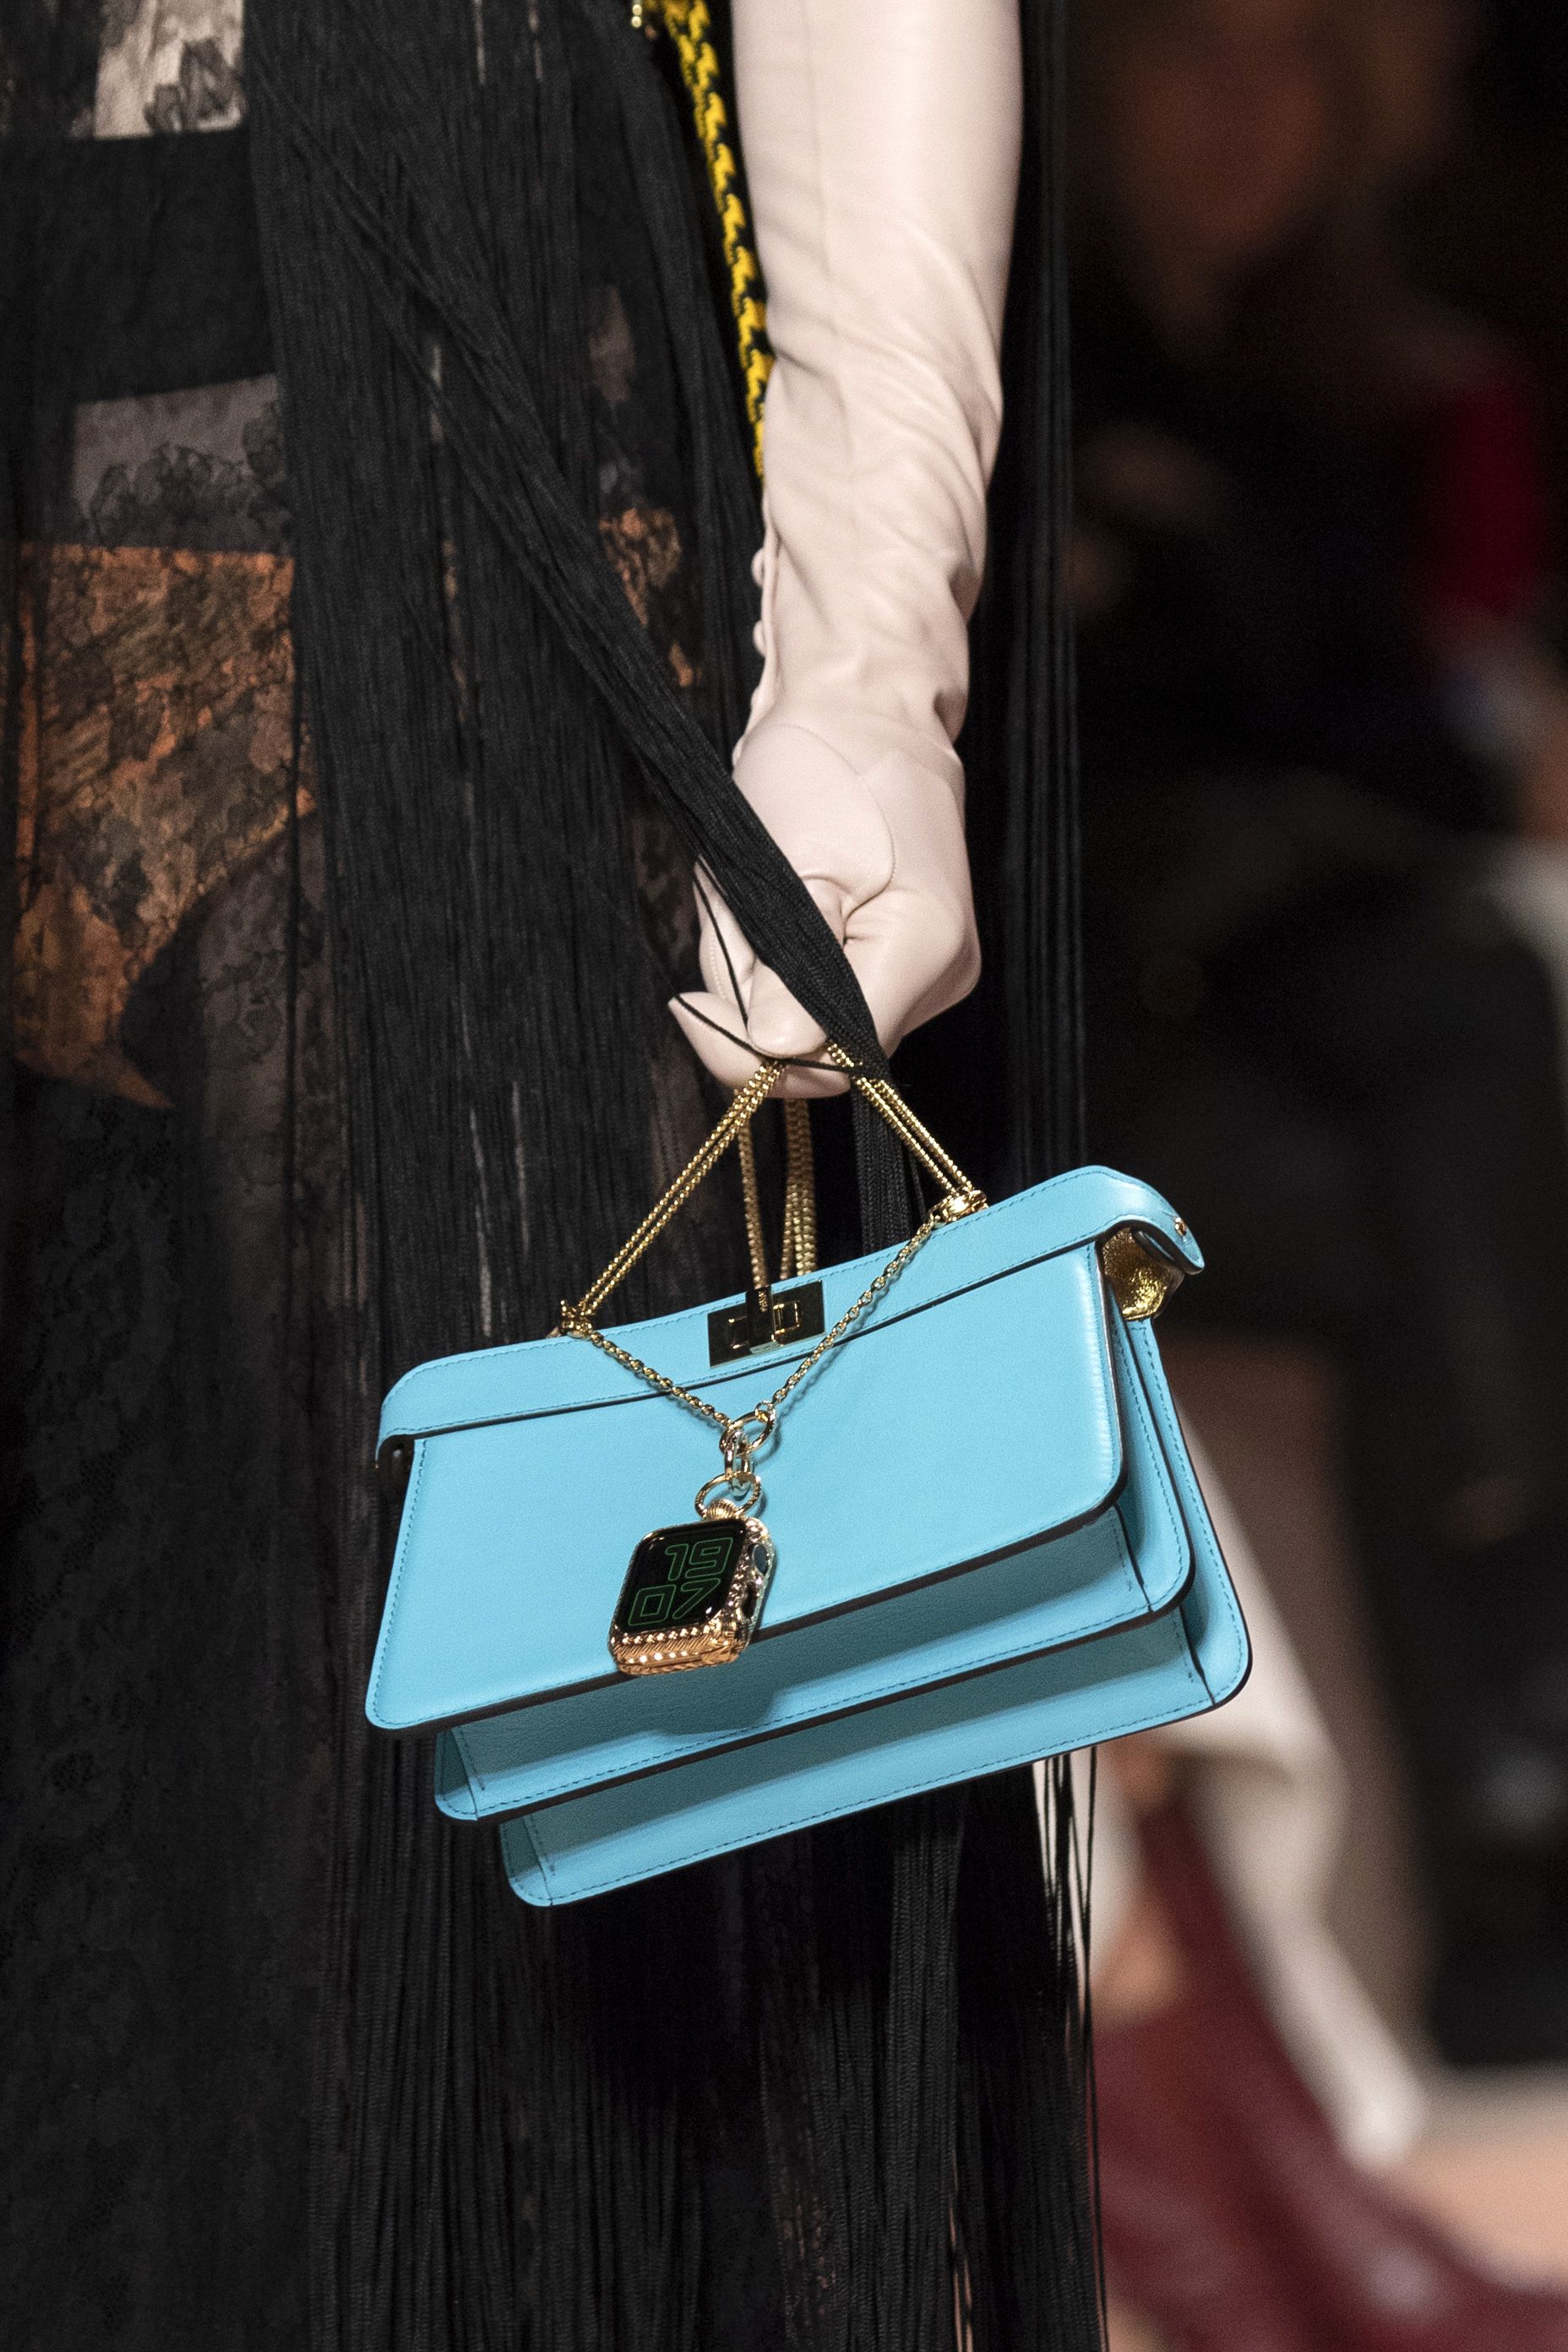 10 Best 2021 Bag Trends — Cute 2021 Bag Trends to Shop Now